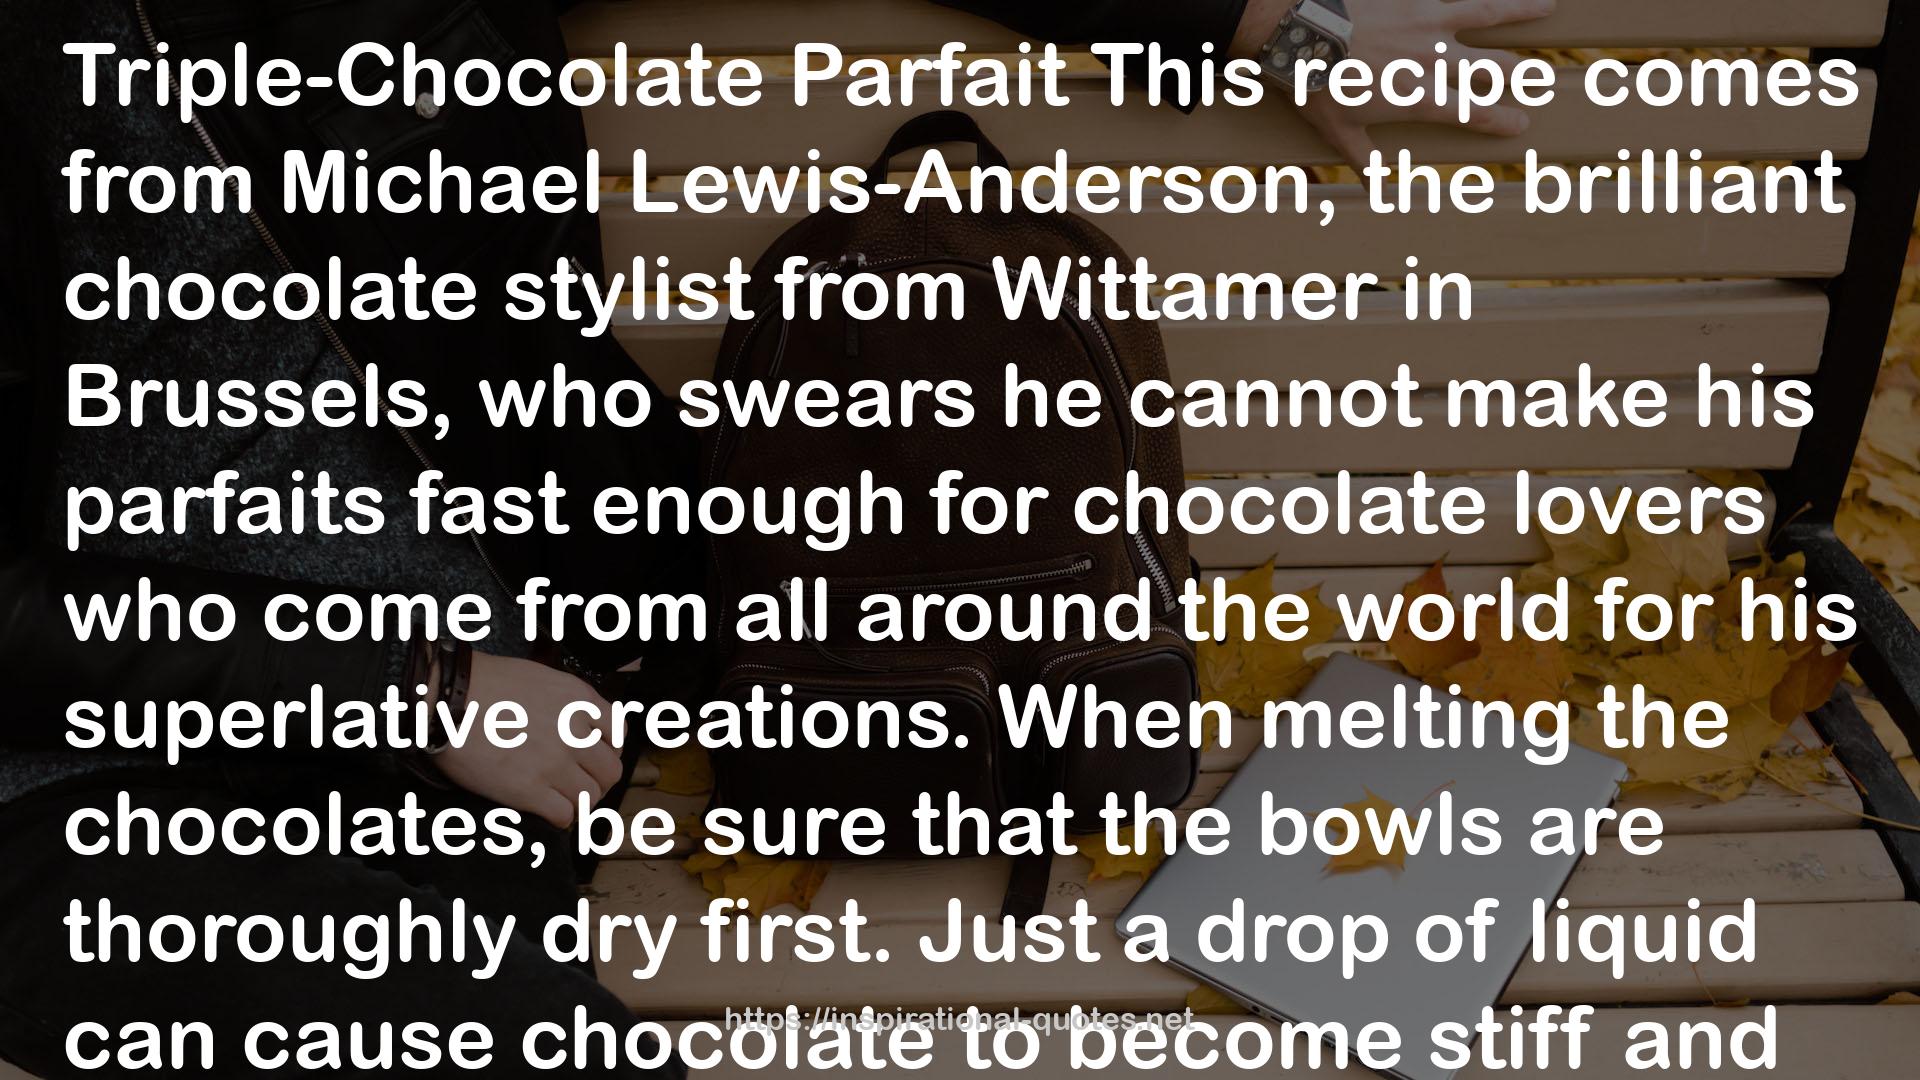 The Great Book of Chocolate: The Chocolate Lover's Guide with Recipes QUOTES